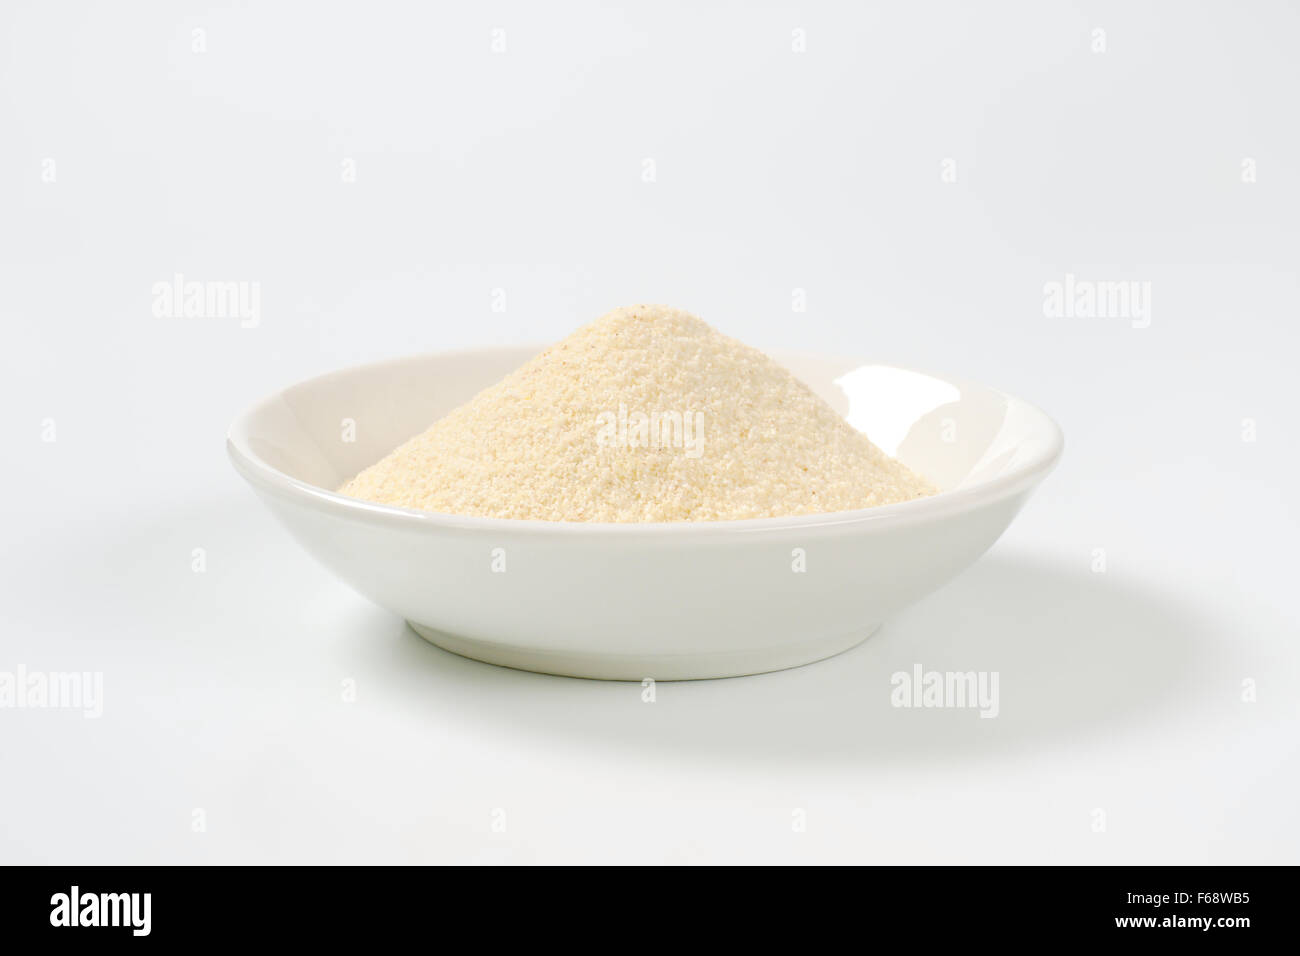 soup plate of grits on white background Stock Photo